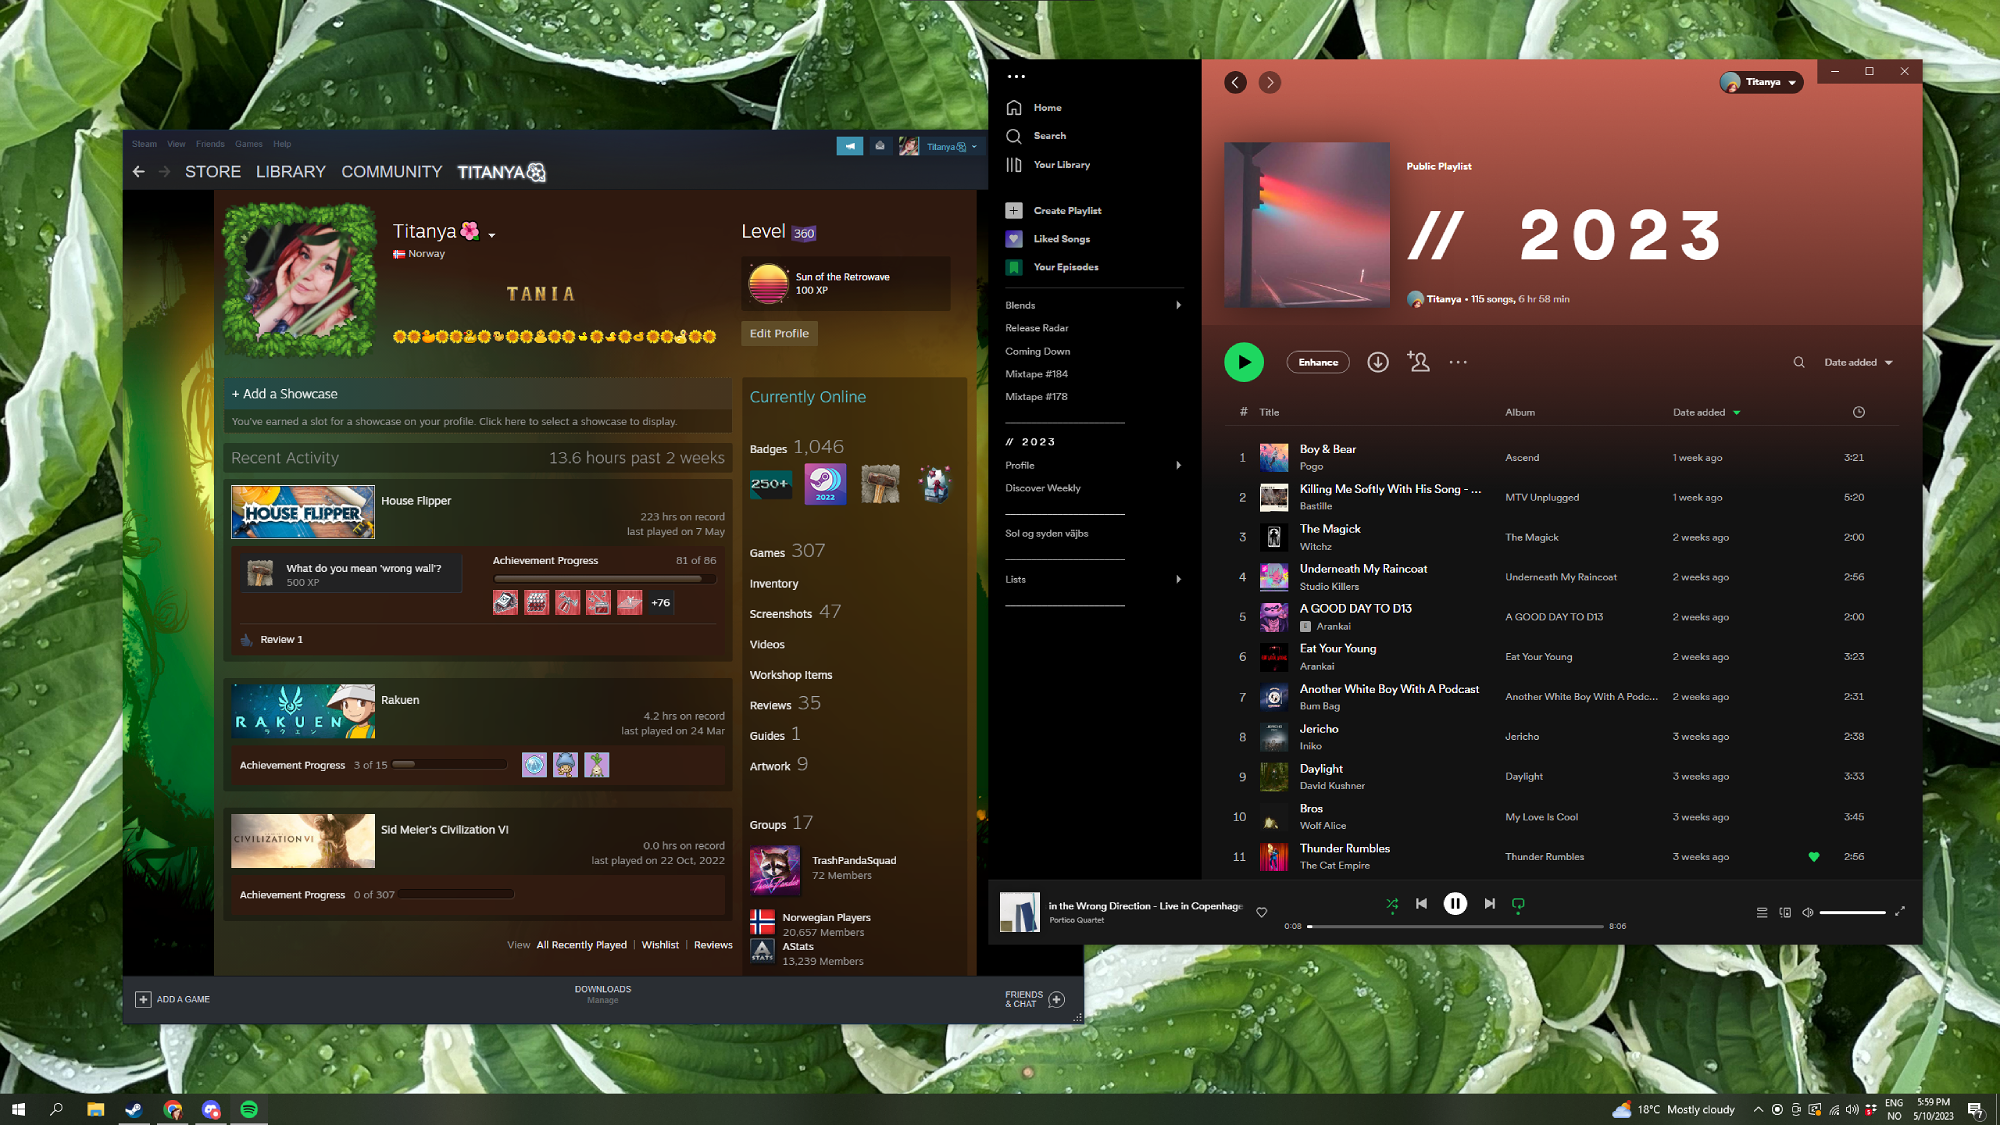 A screenshot of Spotify and Steam windows opened on a computer’s desktop